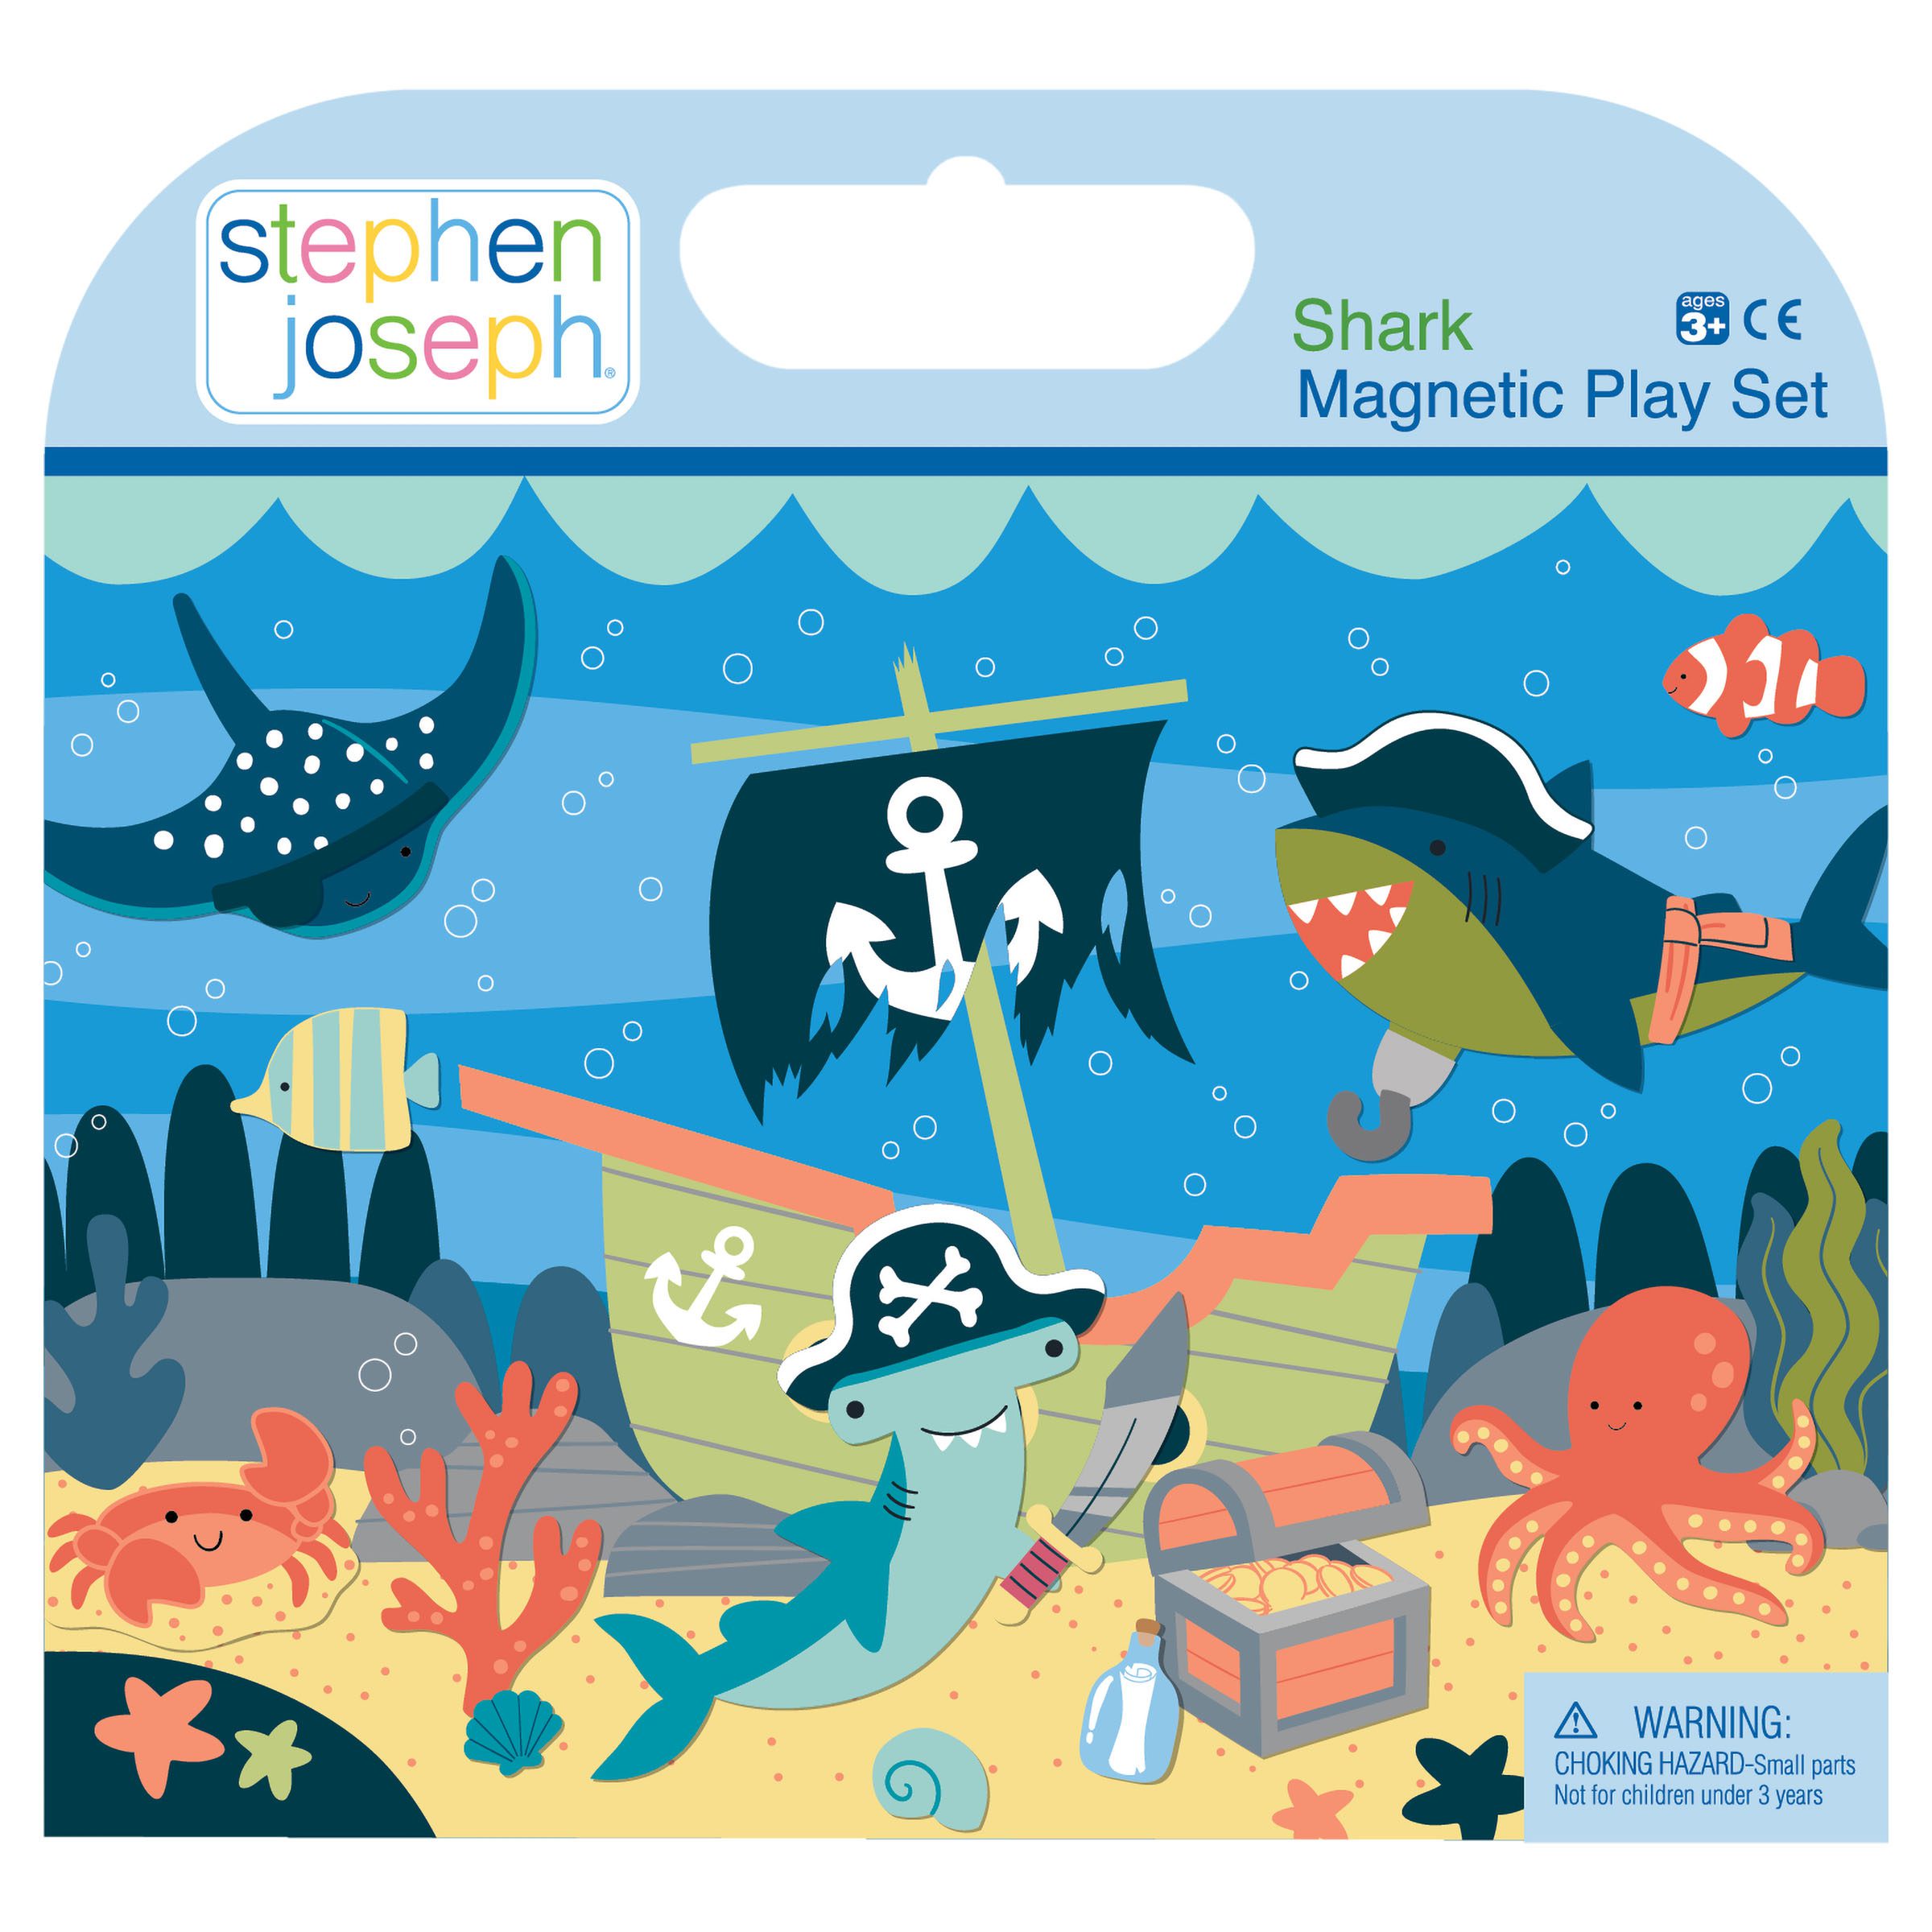 4 In 1 Magnetic Puzzle Book – Stephen Joseph Gifts